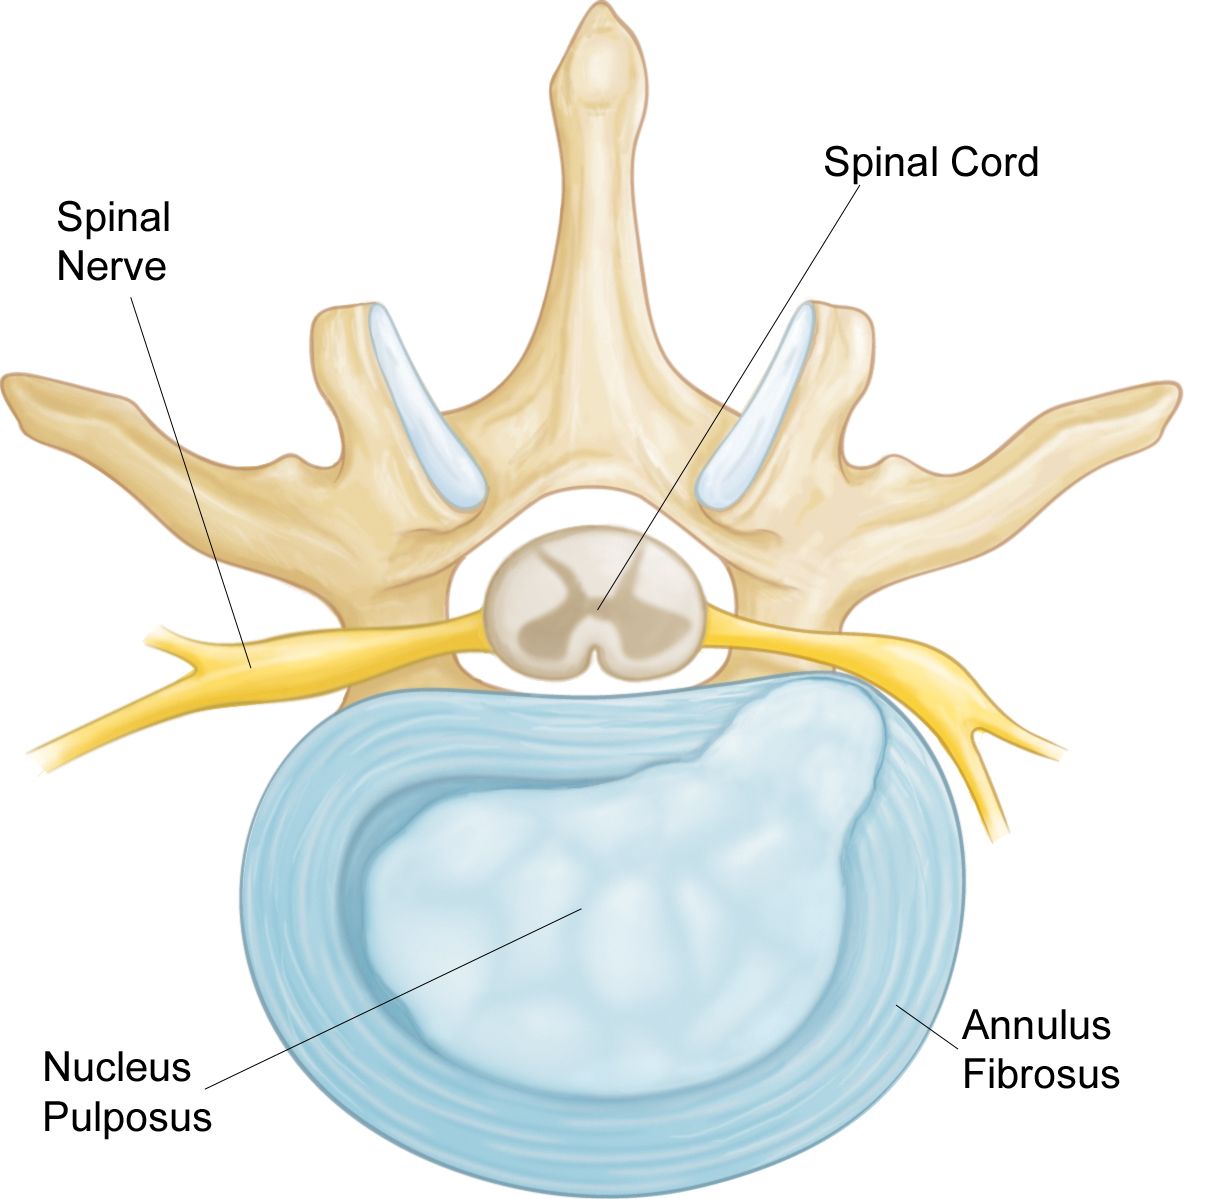 Illustration of a herniated disk